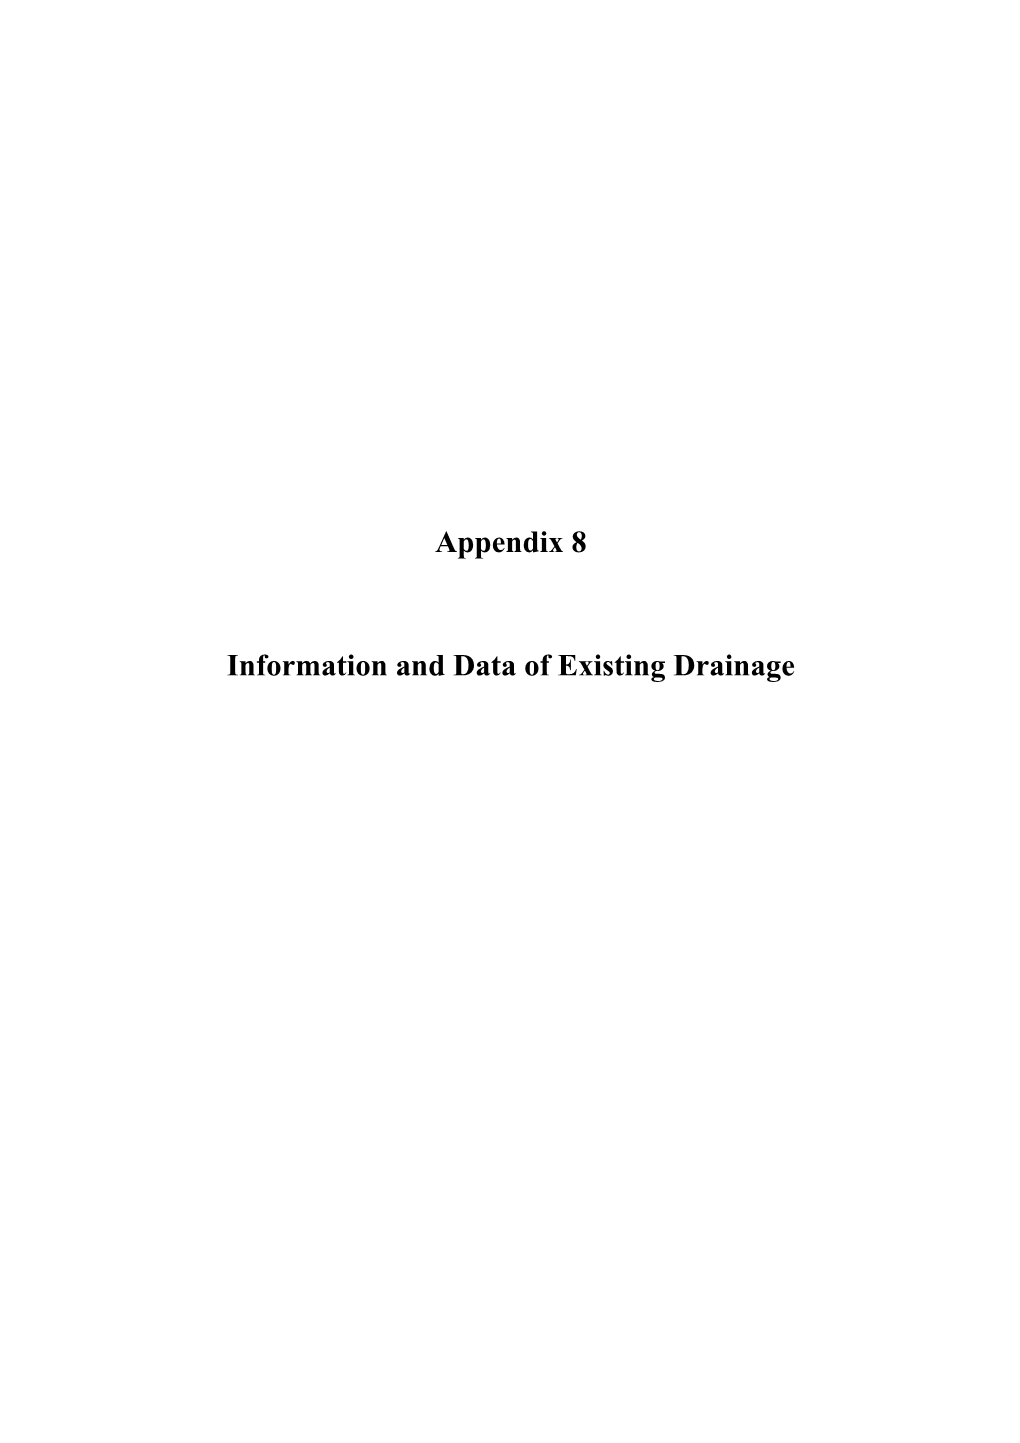 Appendix 8 Information and Data of Existing Drainage